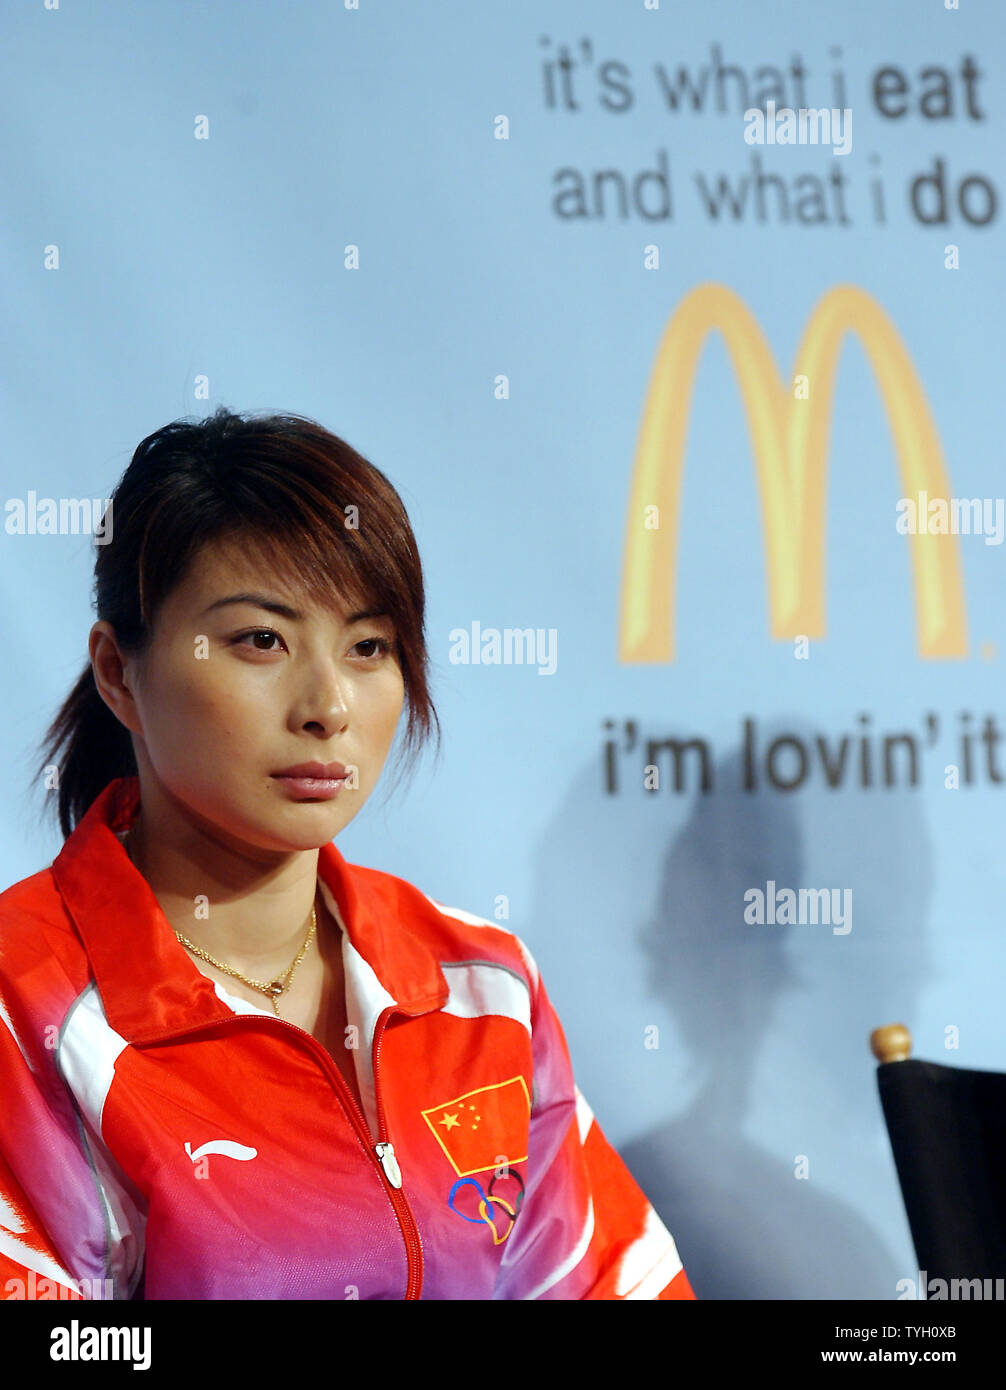 Guo Jingjing, who is on China Olympian diving team, takes part in the McDonald's New York promotional launch on March 8, 2005 of a multi faceted education campaign themed: 'it's what i eat and what i do...i'm lovin' it' to help consumers understand the important interplay between eating right and staying active.  (UPI Photo/Ezio Petersen) Stock Photo